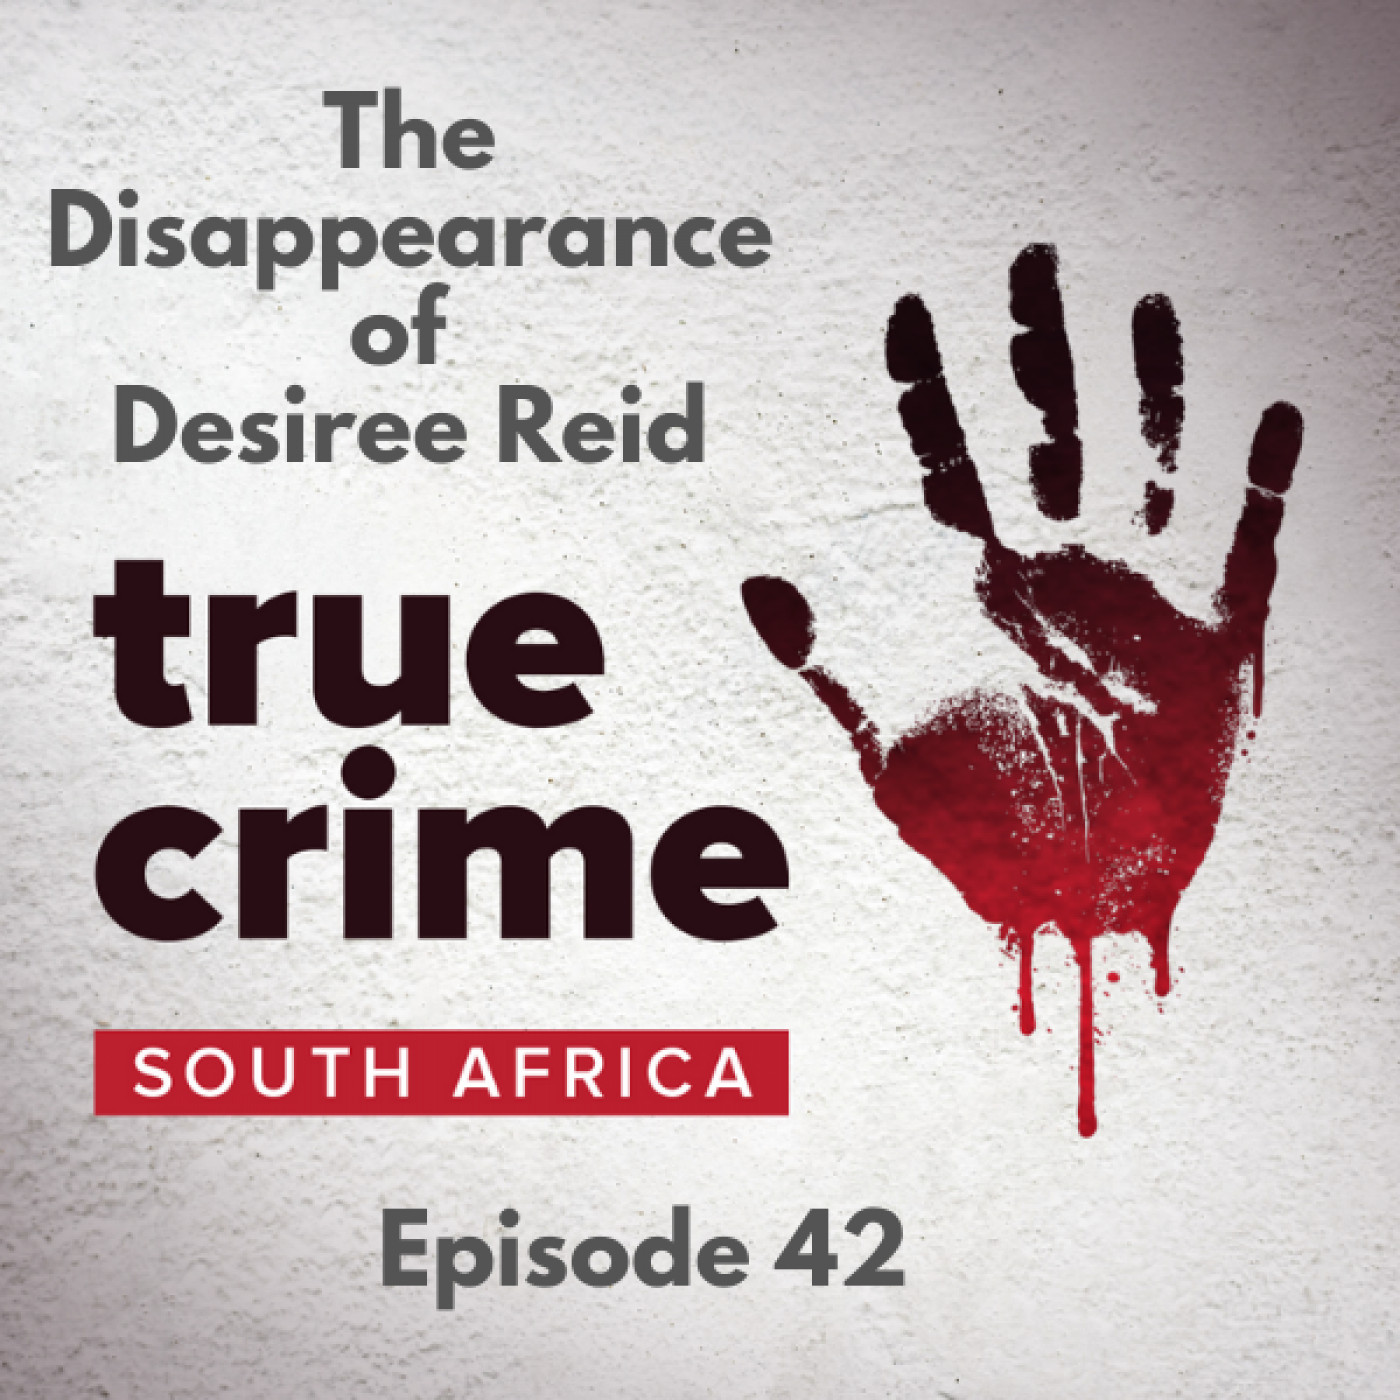 Episode 42 - The Disappearance of Desiree Reid